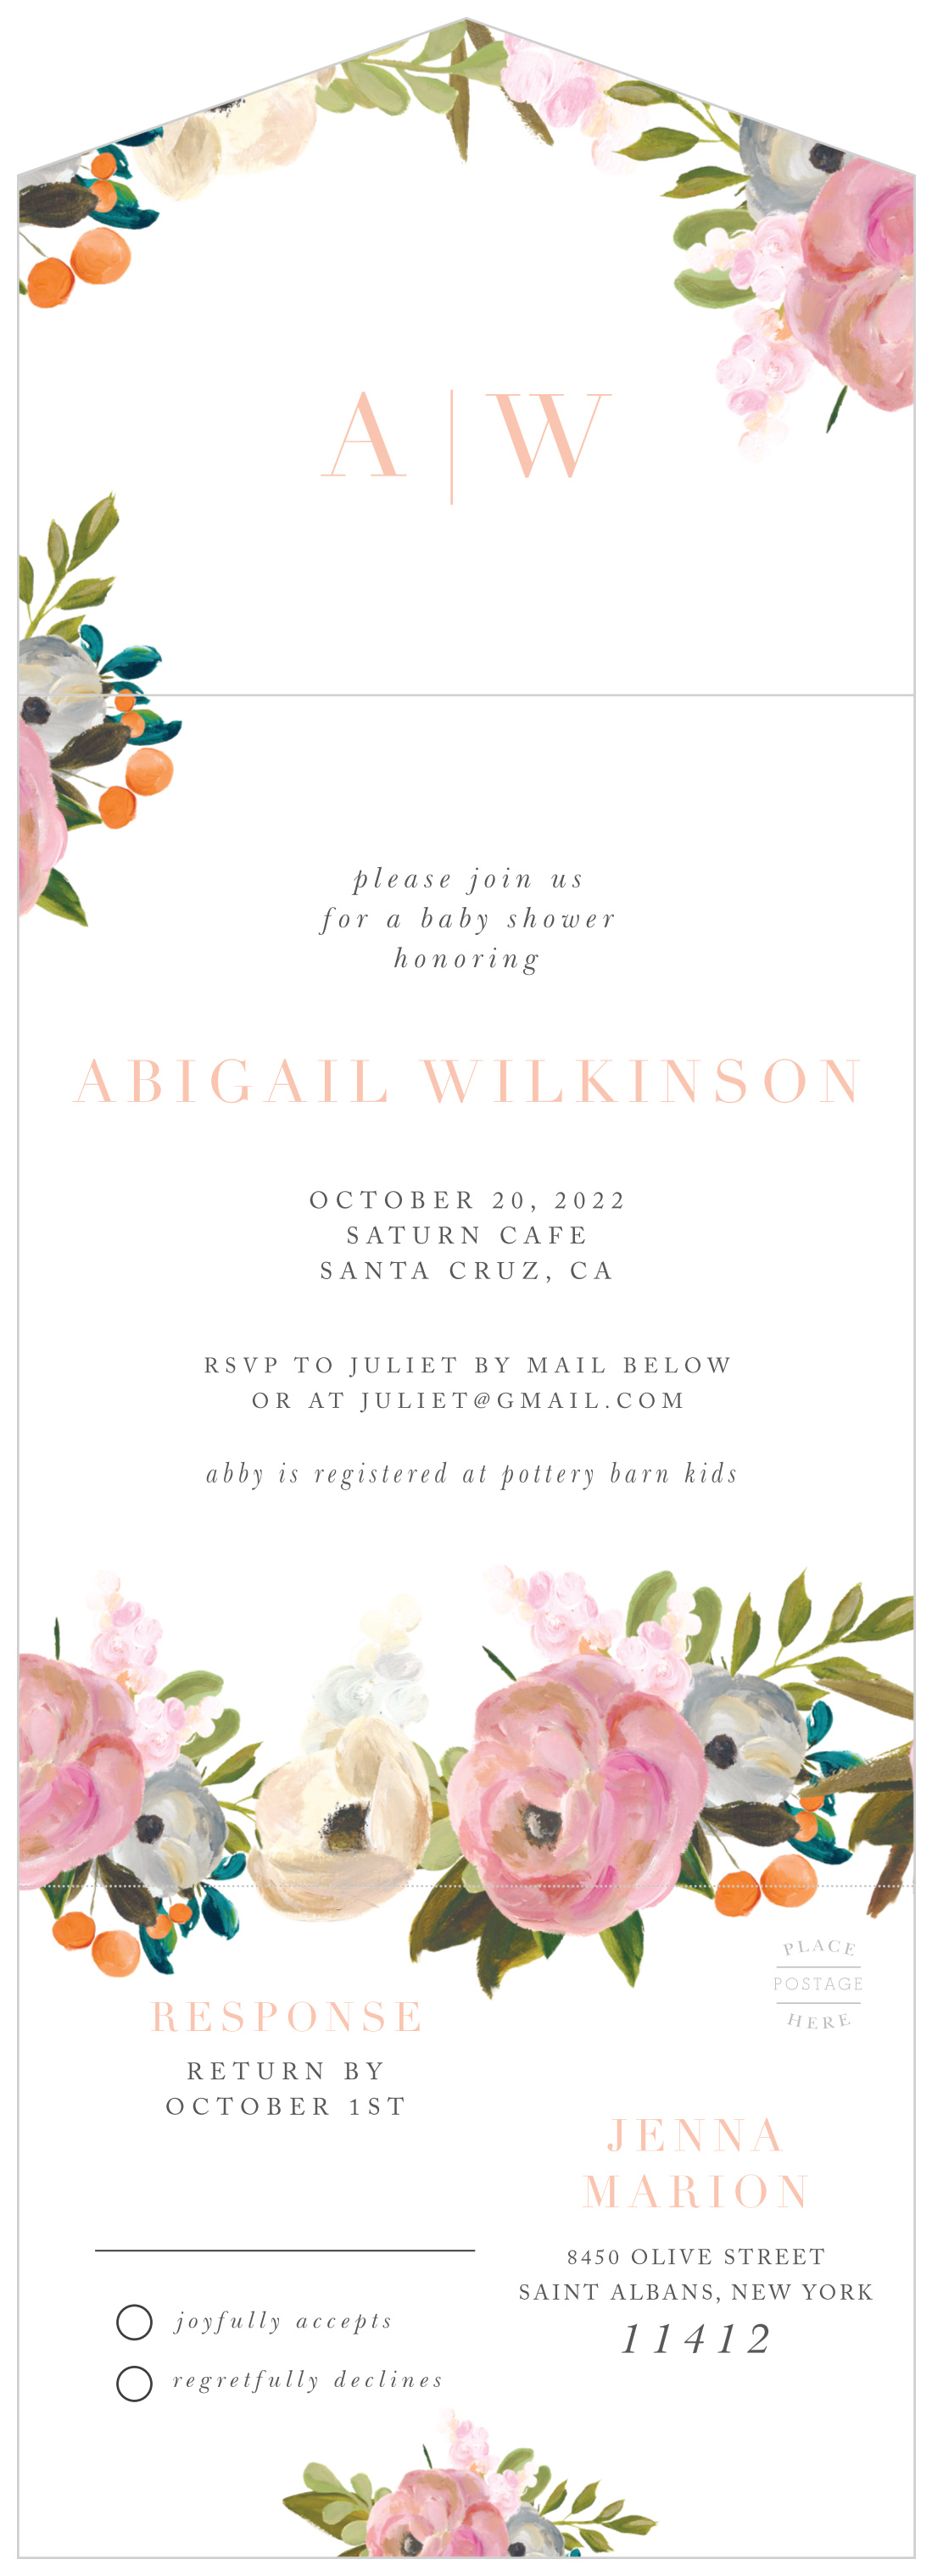 Gouache Blooms Seal & Send Baby Shower Invitations